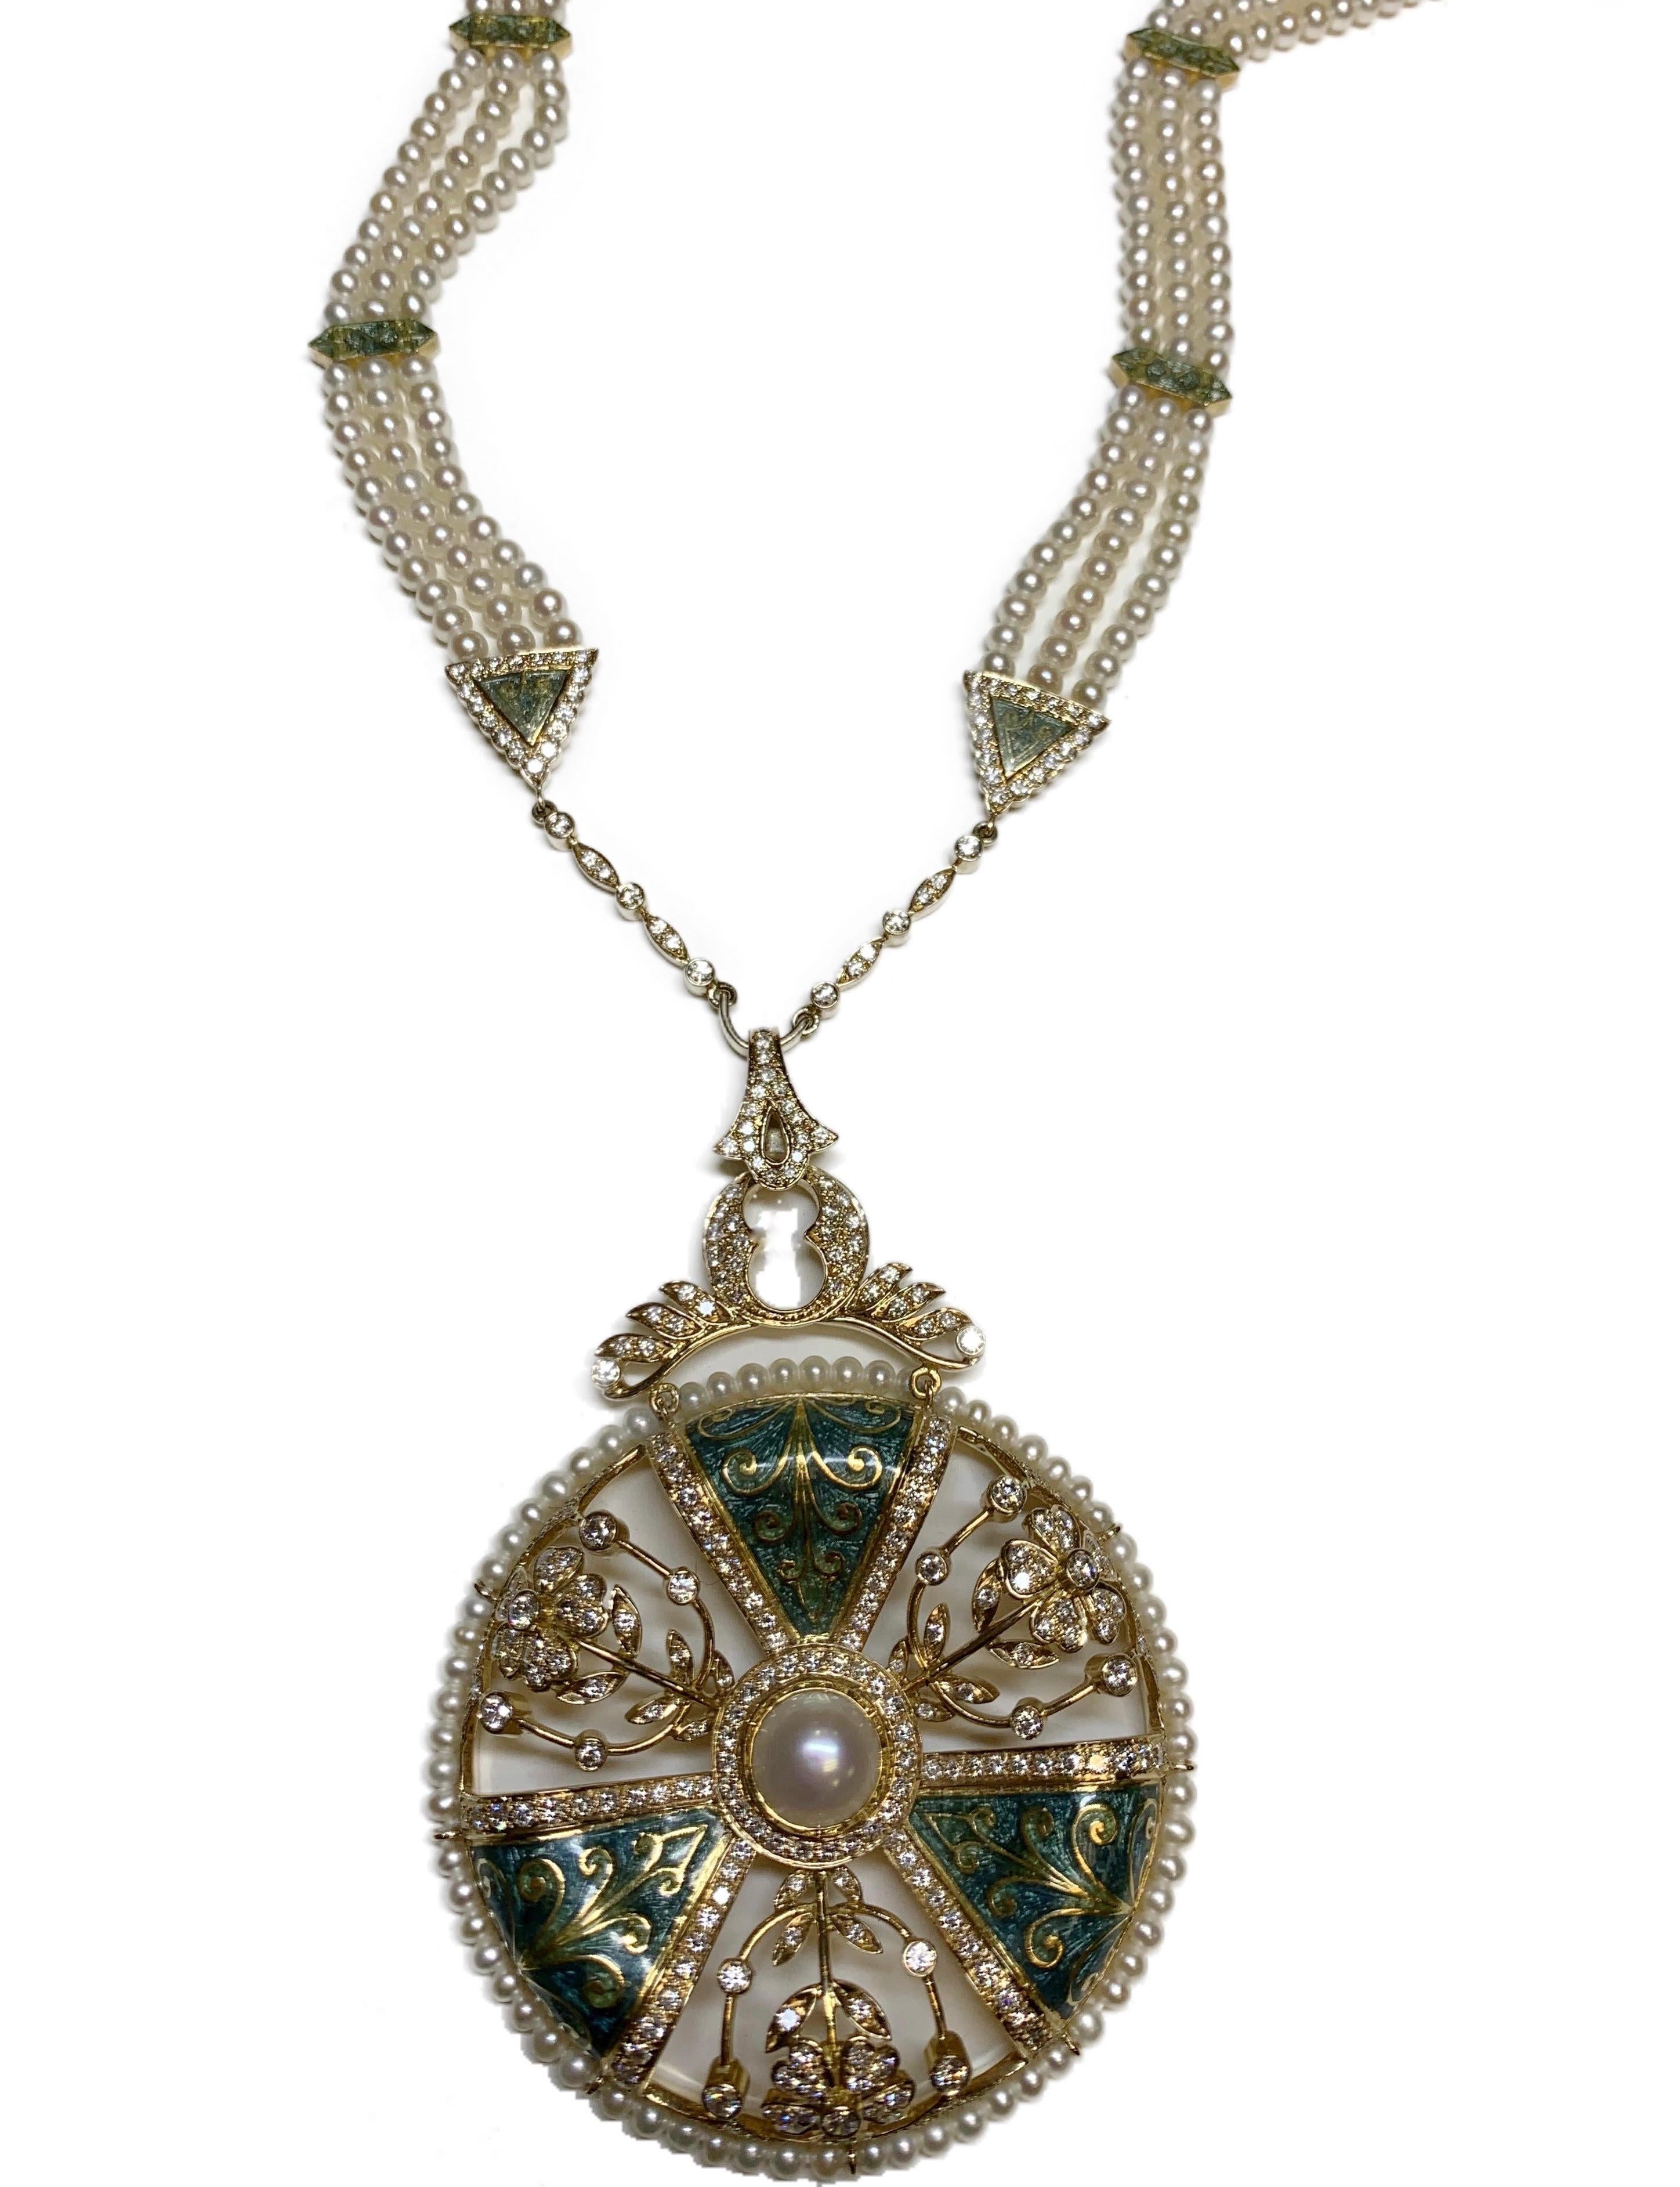 This beautiful necklace has 303 Diamonds weighing a total of 3.19 carats. This Diamond, Pearl, and Enamel necklace is both elegant and eye catching at the same time. 
Pearl, Diamond, and Mint Green Enamel Necklace
18 Karat Yellow Gold
White Diamonds